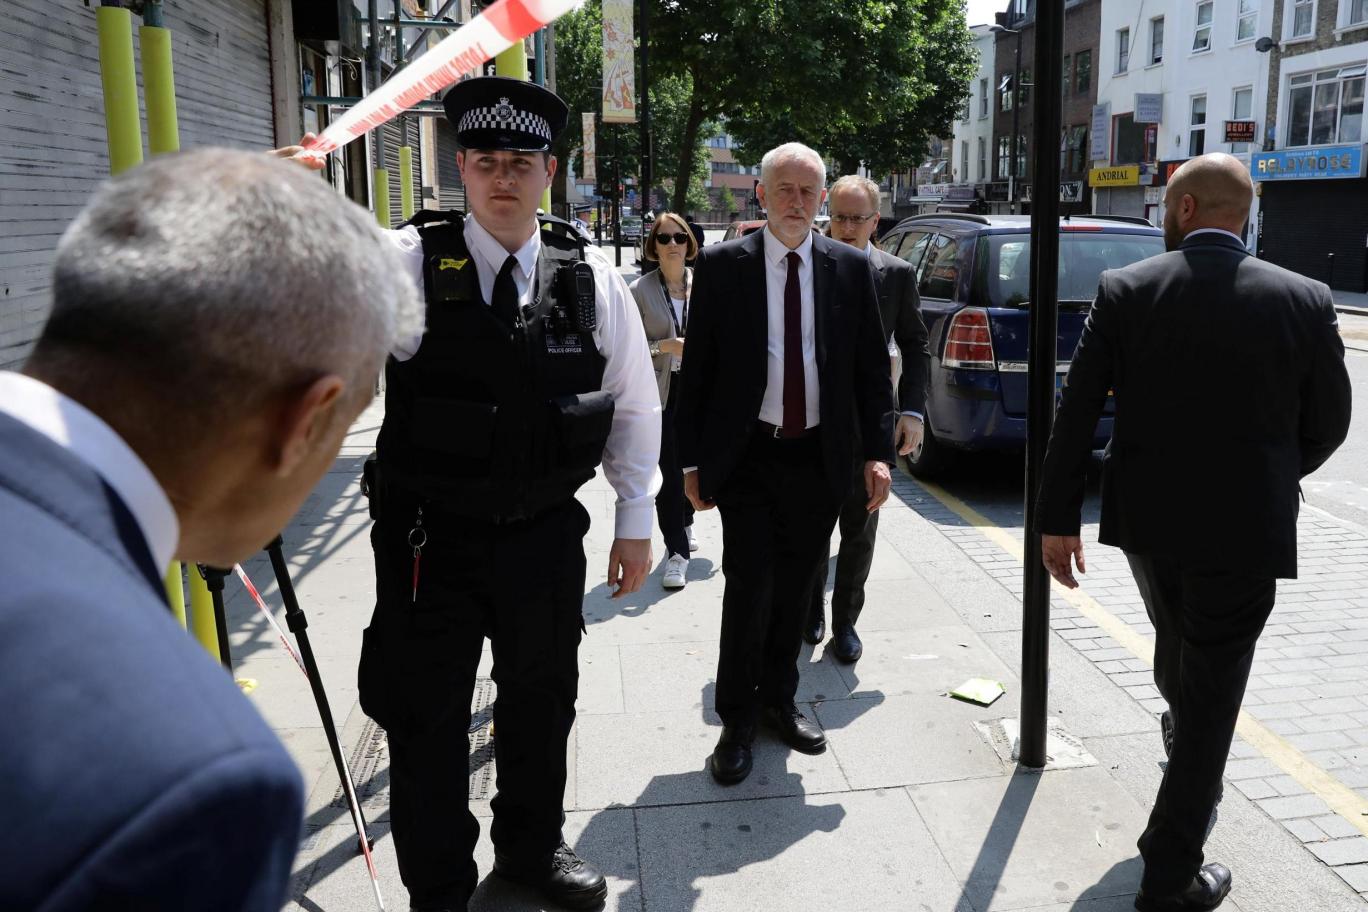 Theresa May, Jeremy Corbyn Visit Finsbury Mosque - About Islam